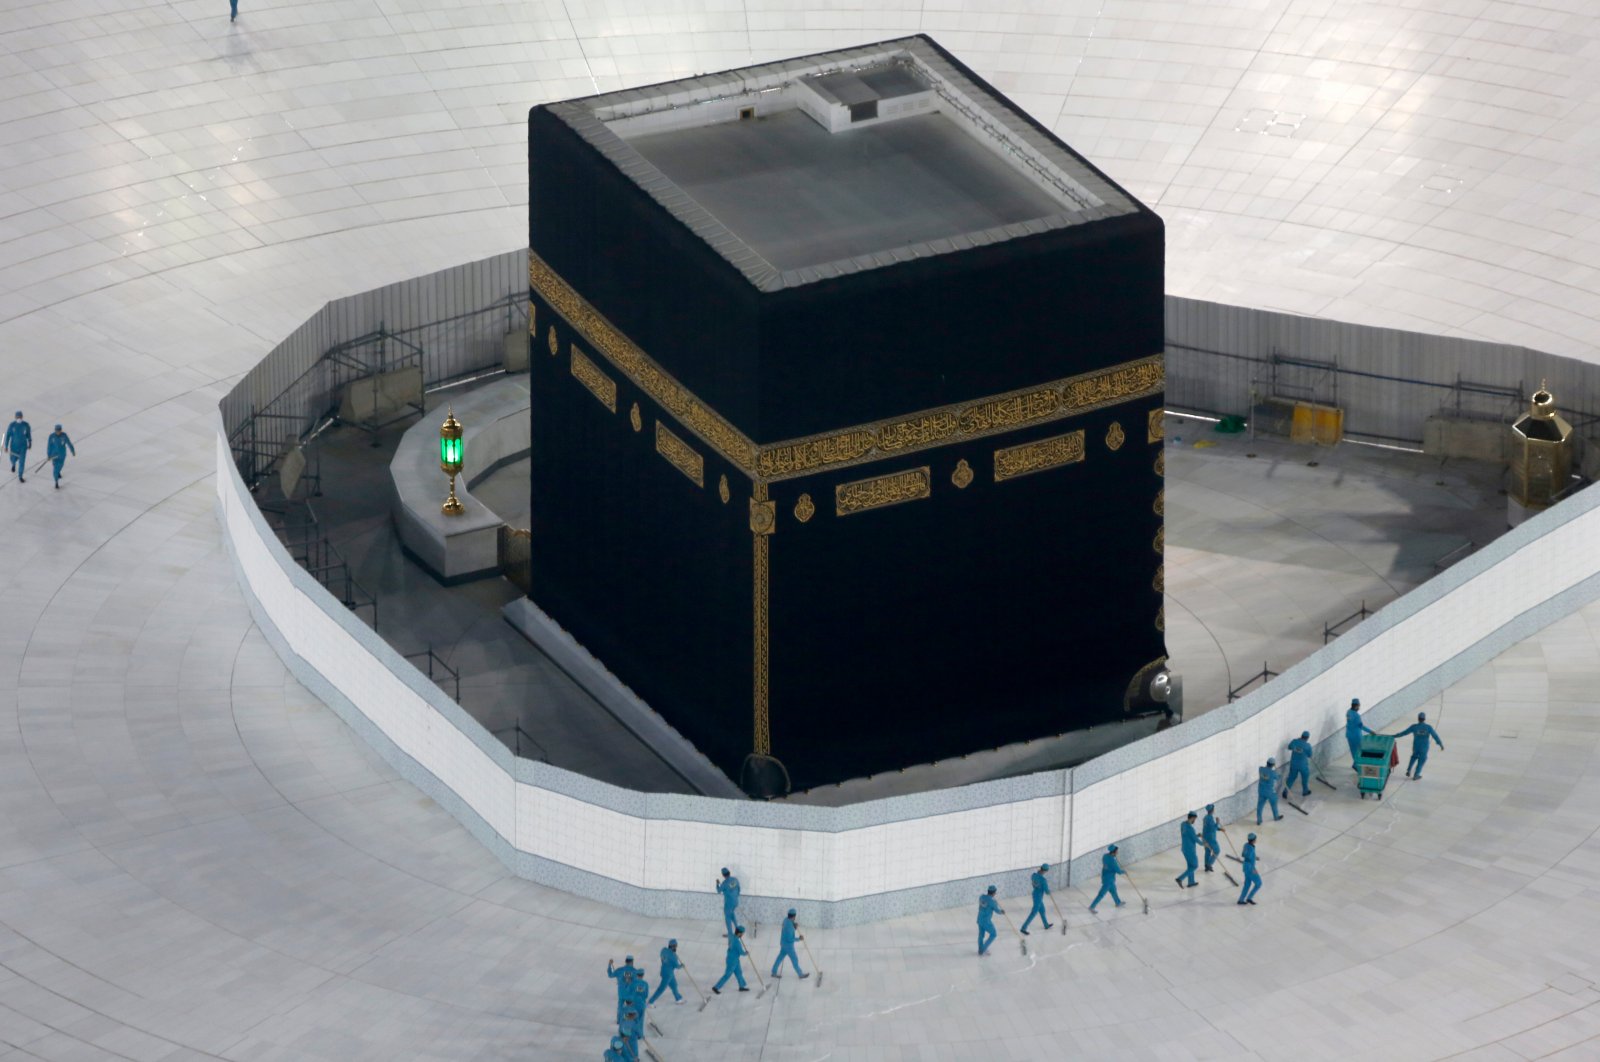 Workers disinfect the ground around the Kaaba, the cubic building at the Grand Mosque, over fears of the coronavirus, in the Muslim holy city of Mecca, Saudi Arabia, March 7, 2020. (AP Photo)